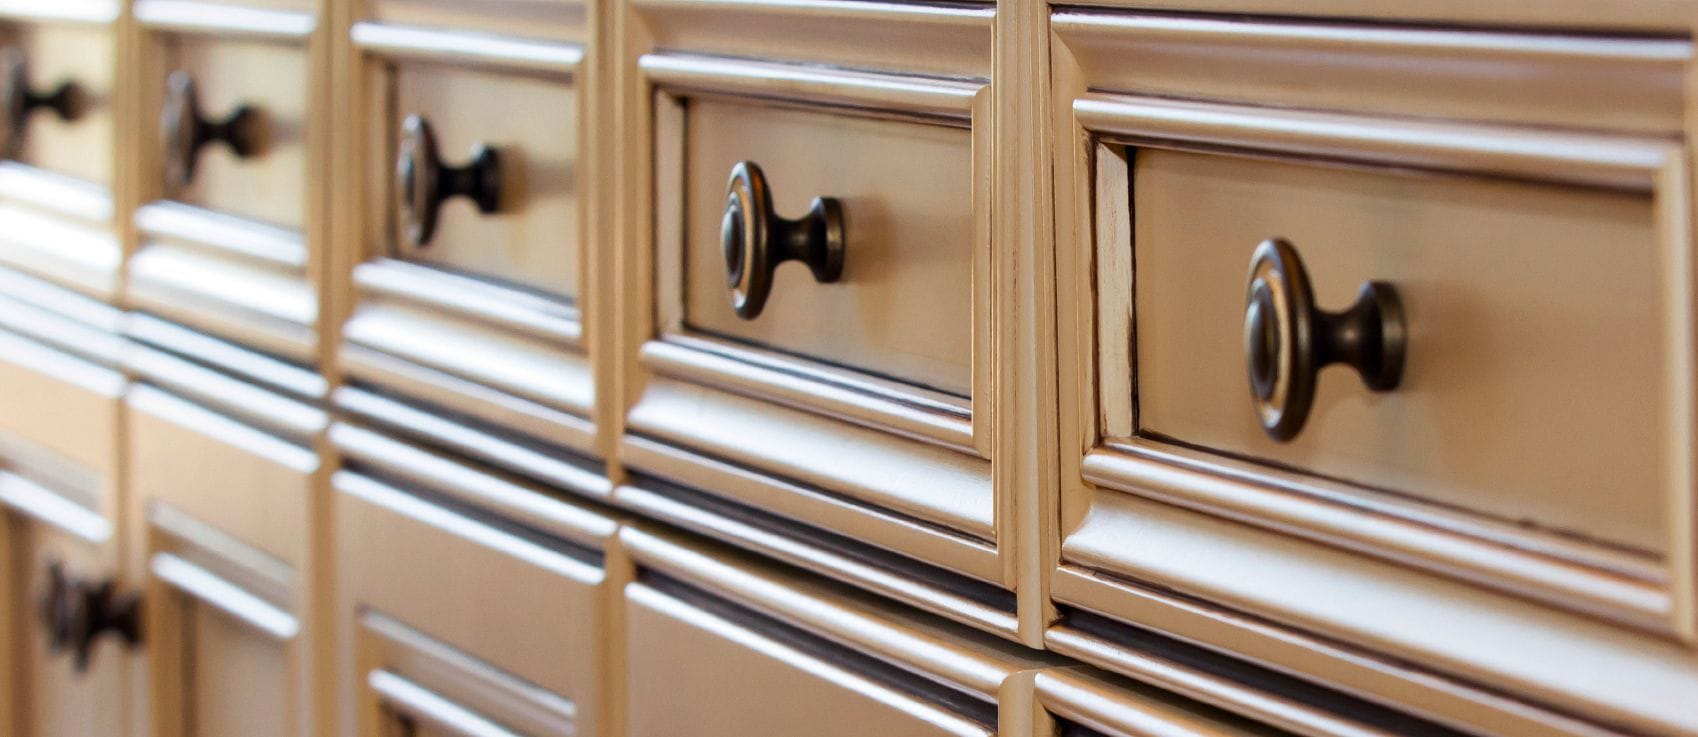 Kitchen Cabinet Knobs Pulls And Handles, Vanity Knobs And Pulls